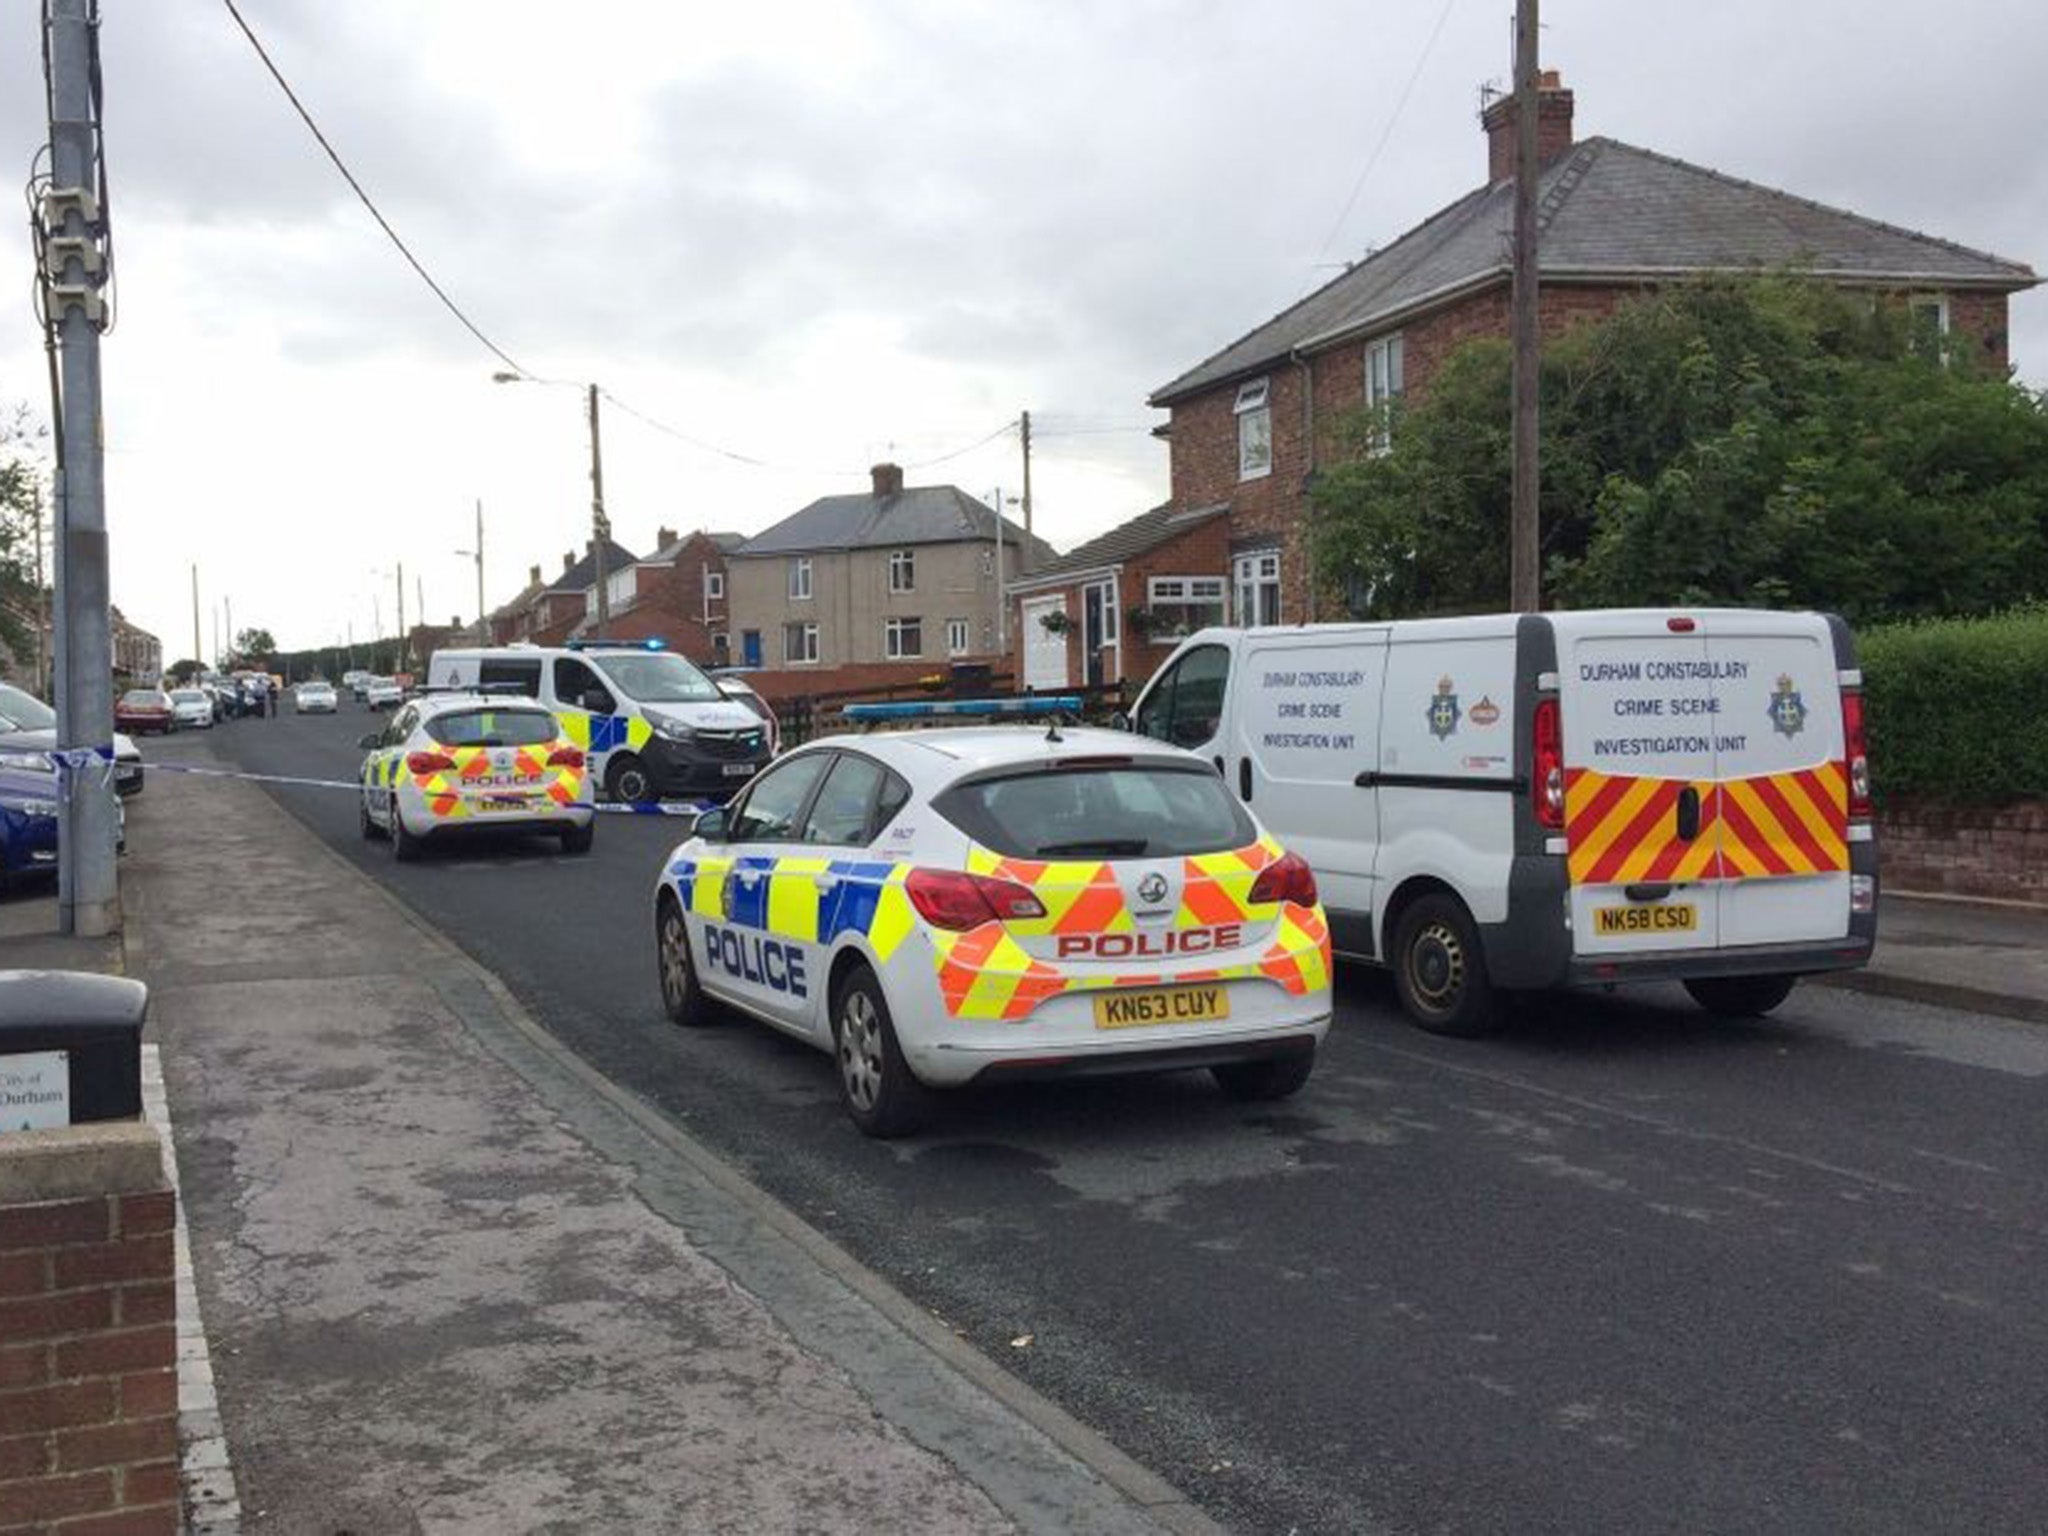 Police at the scene in Kelloe, Co. Durham after a man died in hospital on Wednesday after being stabbed in the chest